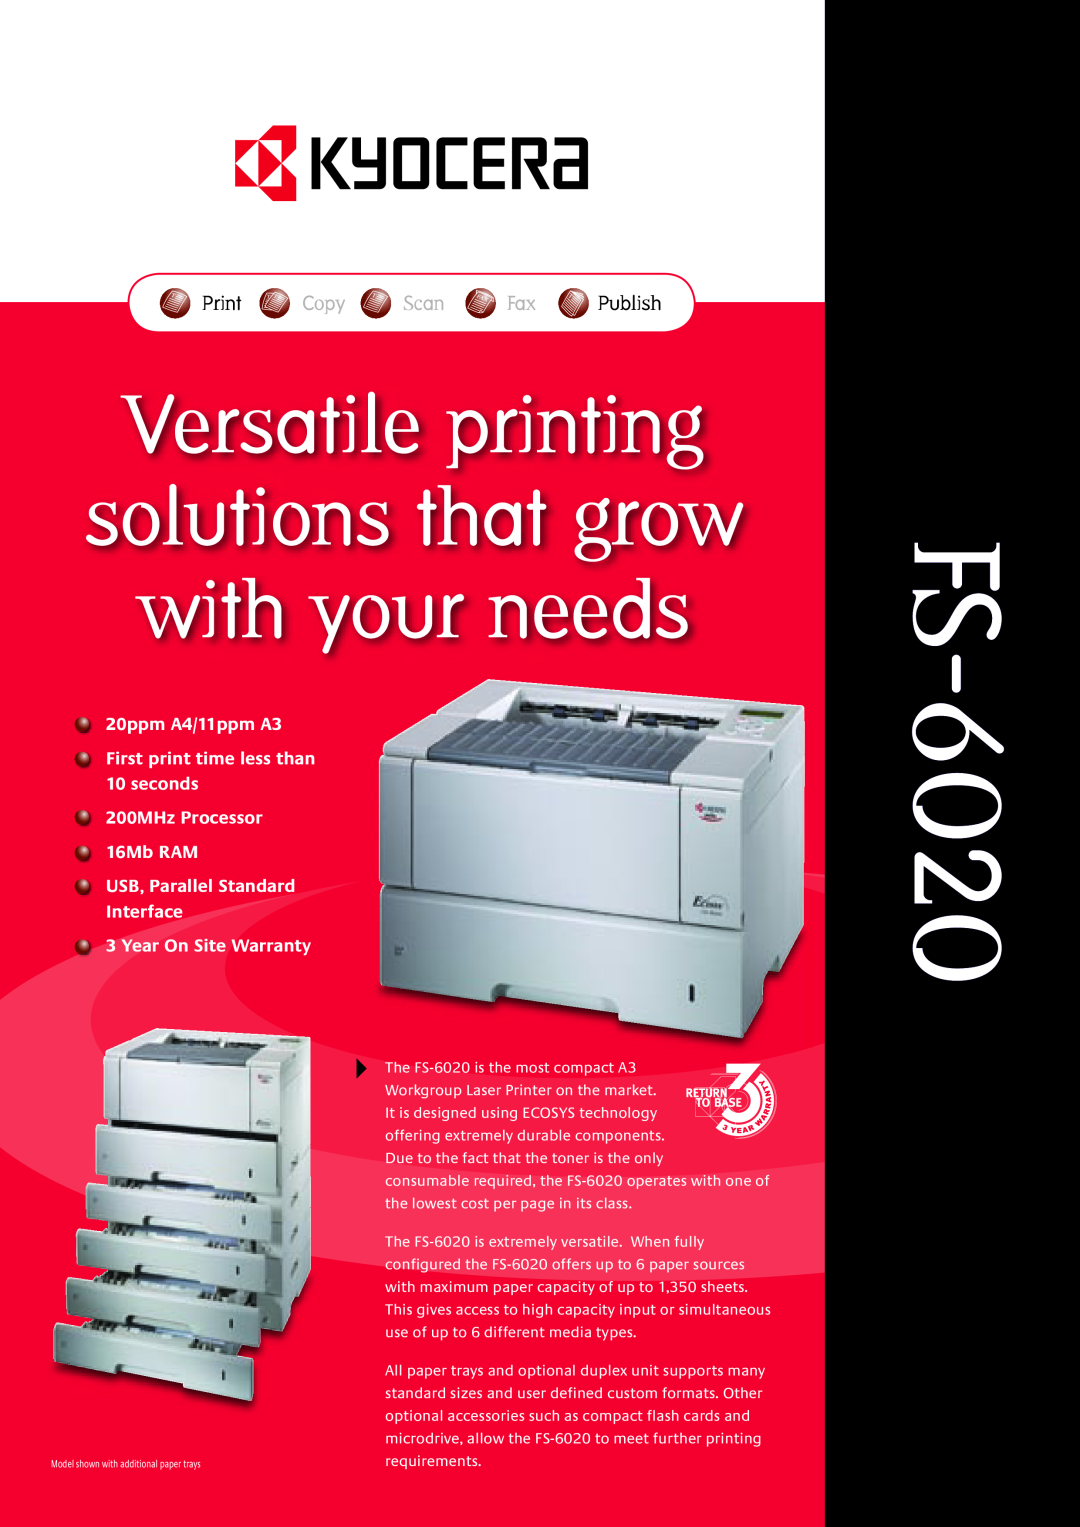 Kyocera fs-6020 warranty Versatile printing solutions that grow with your needs, Print Copy Scan Fax Publish 